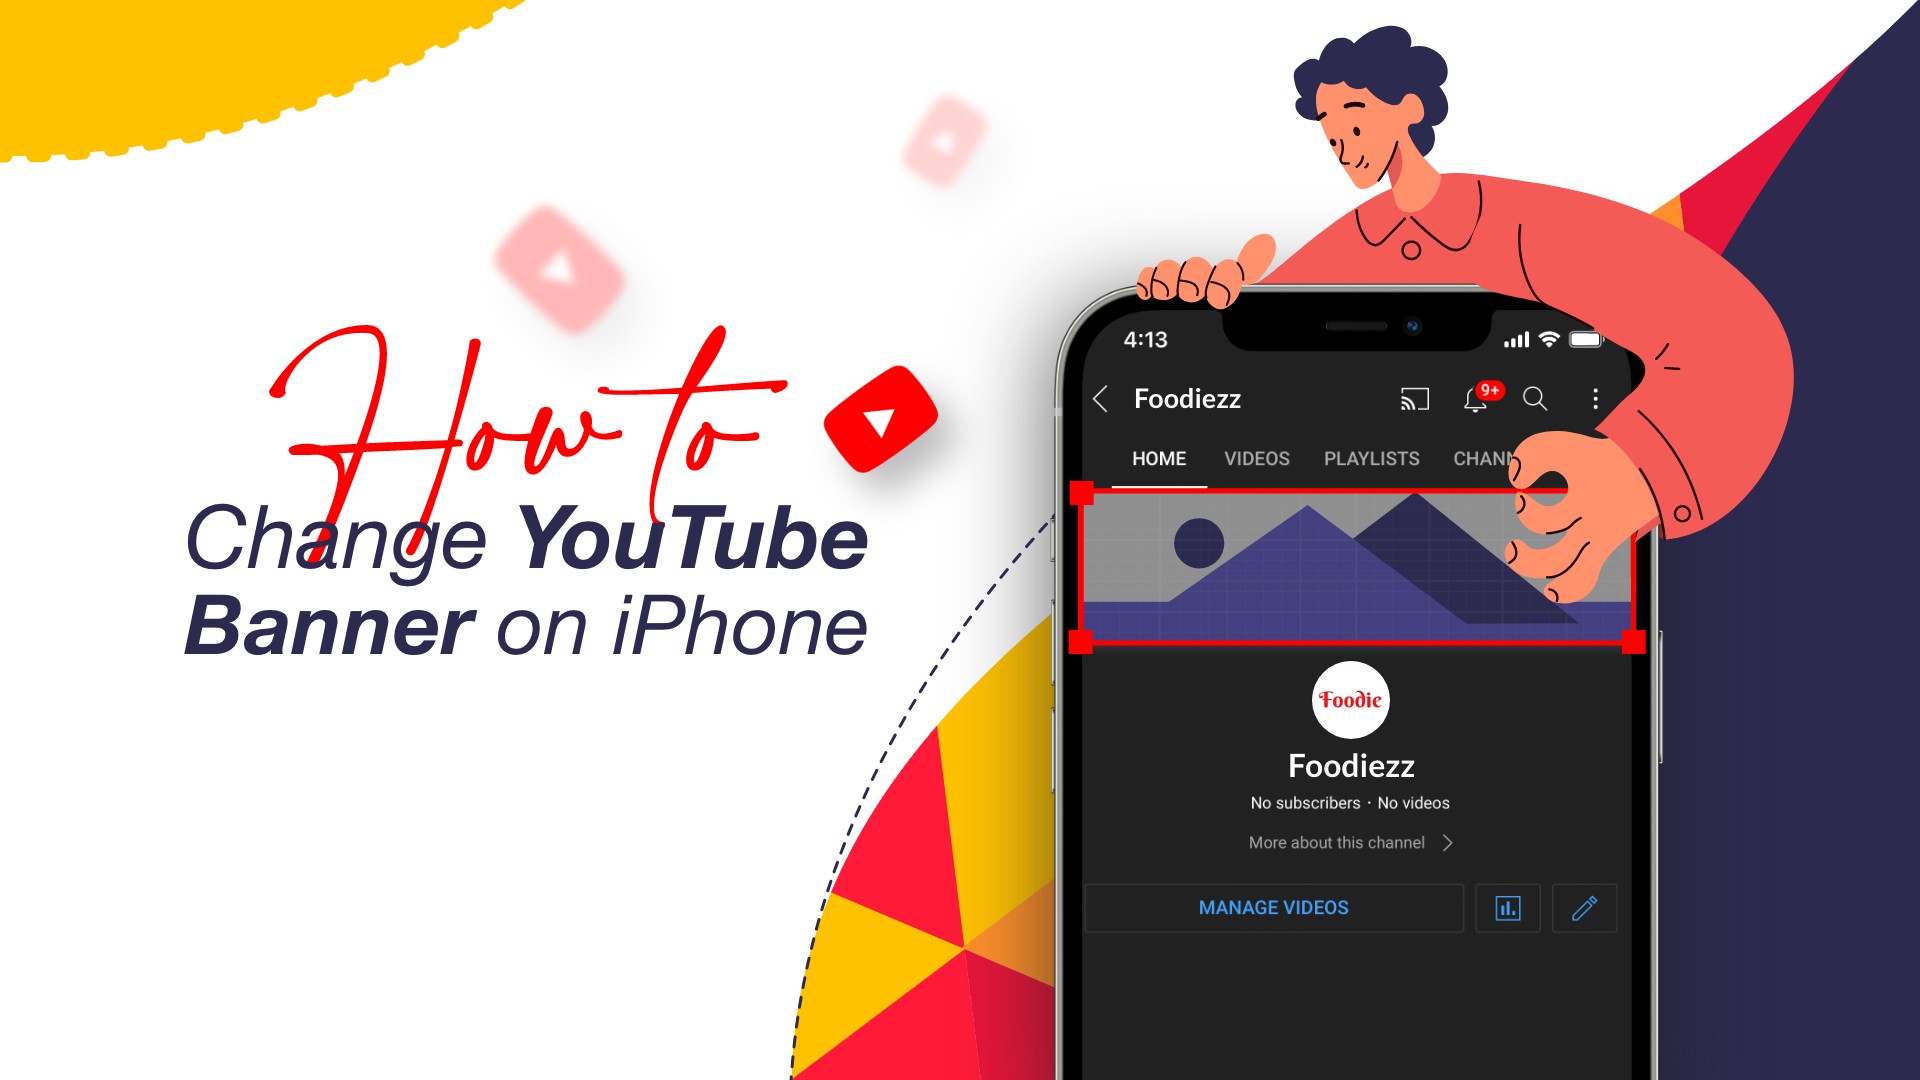 How to Change Youtube Channel Banner on iPhone